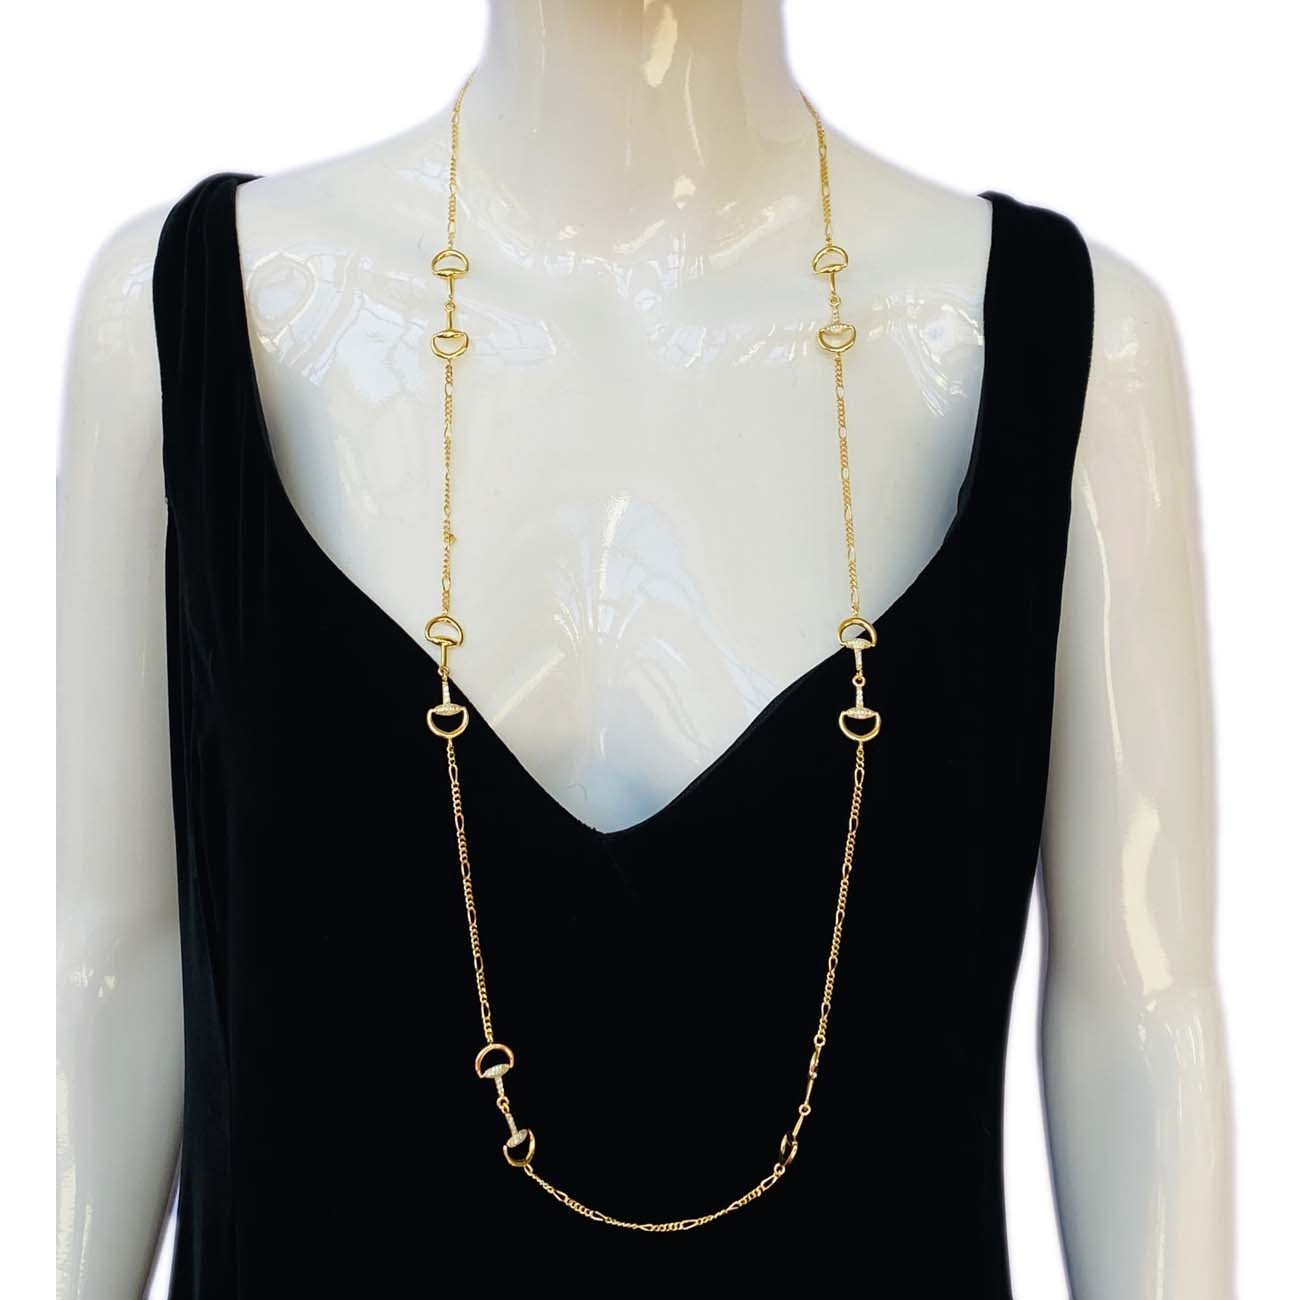 Long Gold Necklace with Micro Crystals | JEWELRY | Met Opera Shop